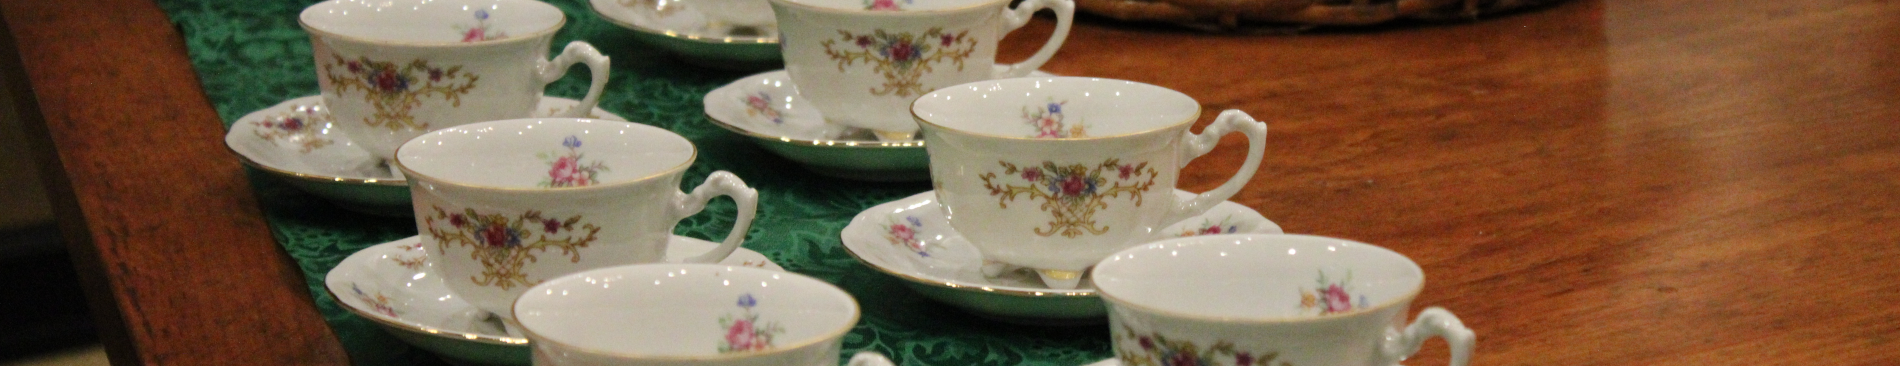 Ornate china teacups laid out in double rows